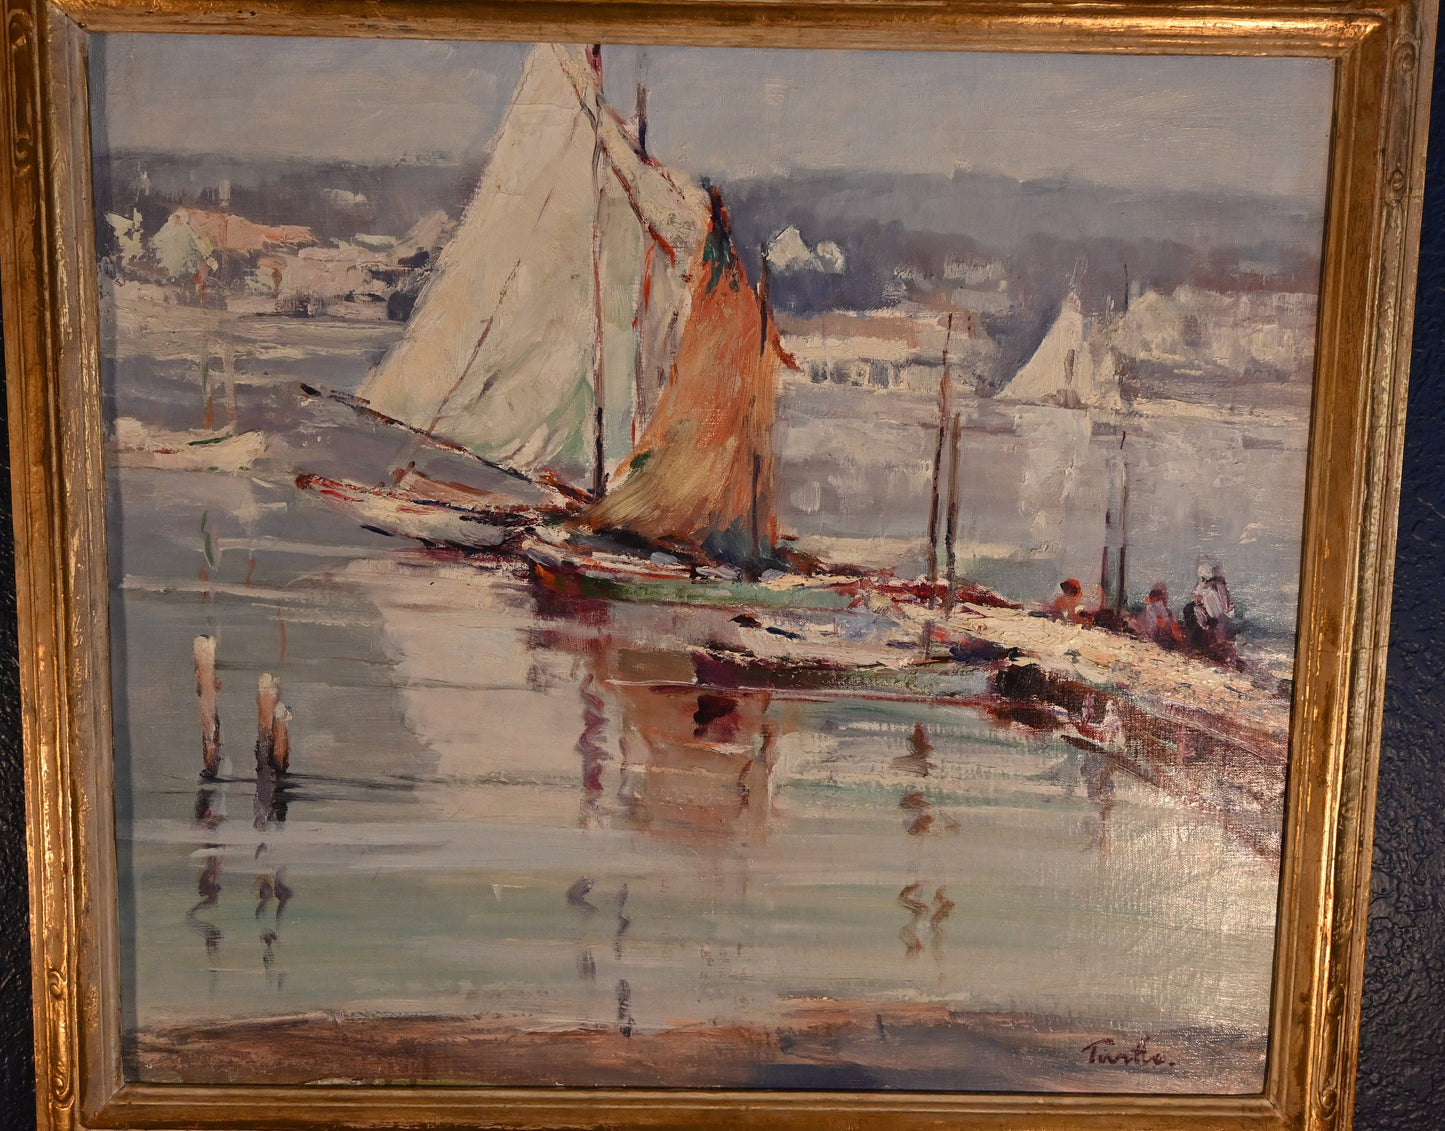 Arnold E. Turtle ( USA/ England 1892 - 1954) Original Oil - 27.5"H x 30"W- Impressionist Well listed Artist -High auction and galley prices!